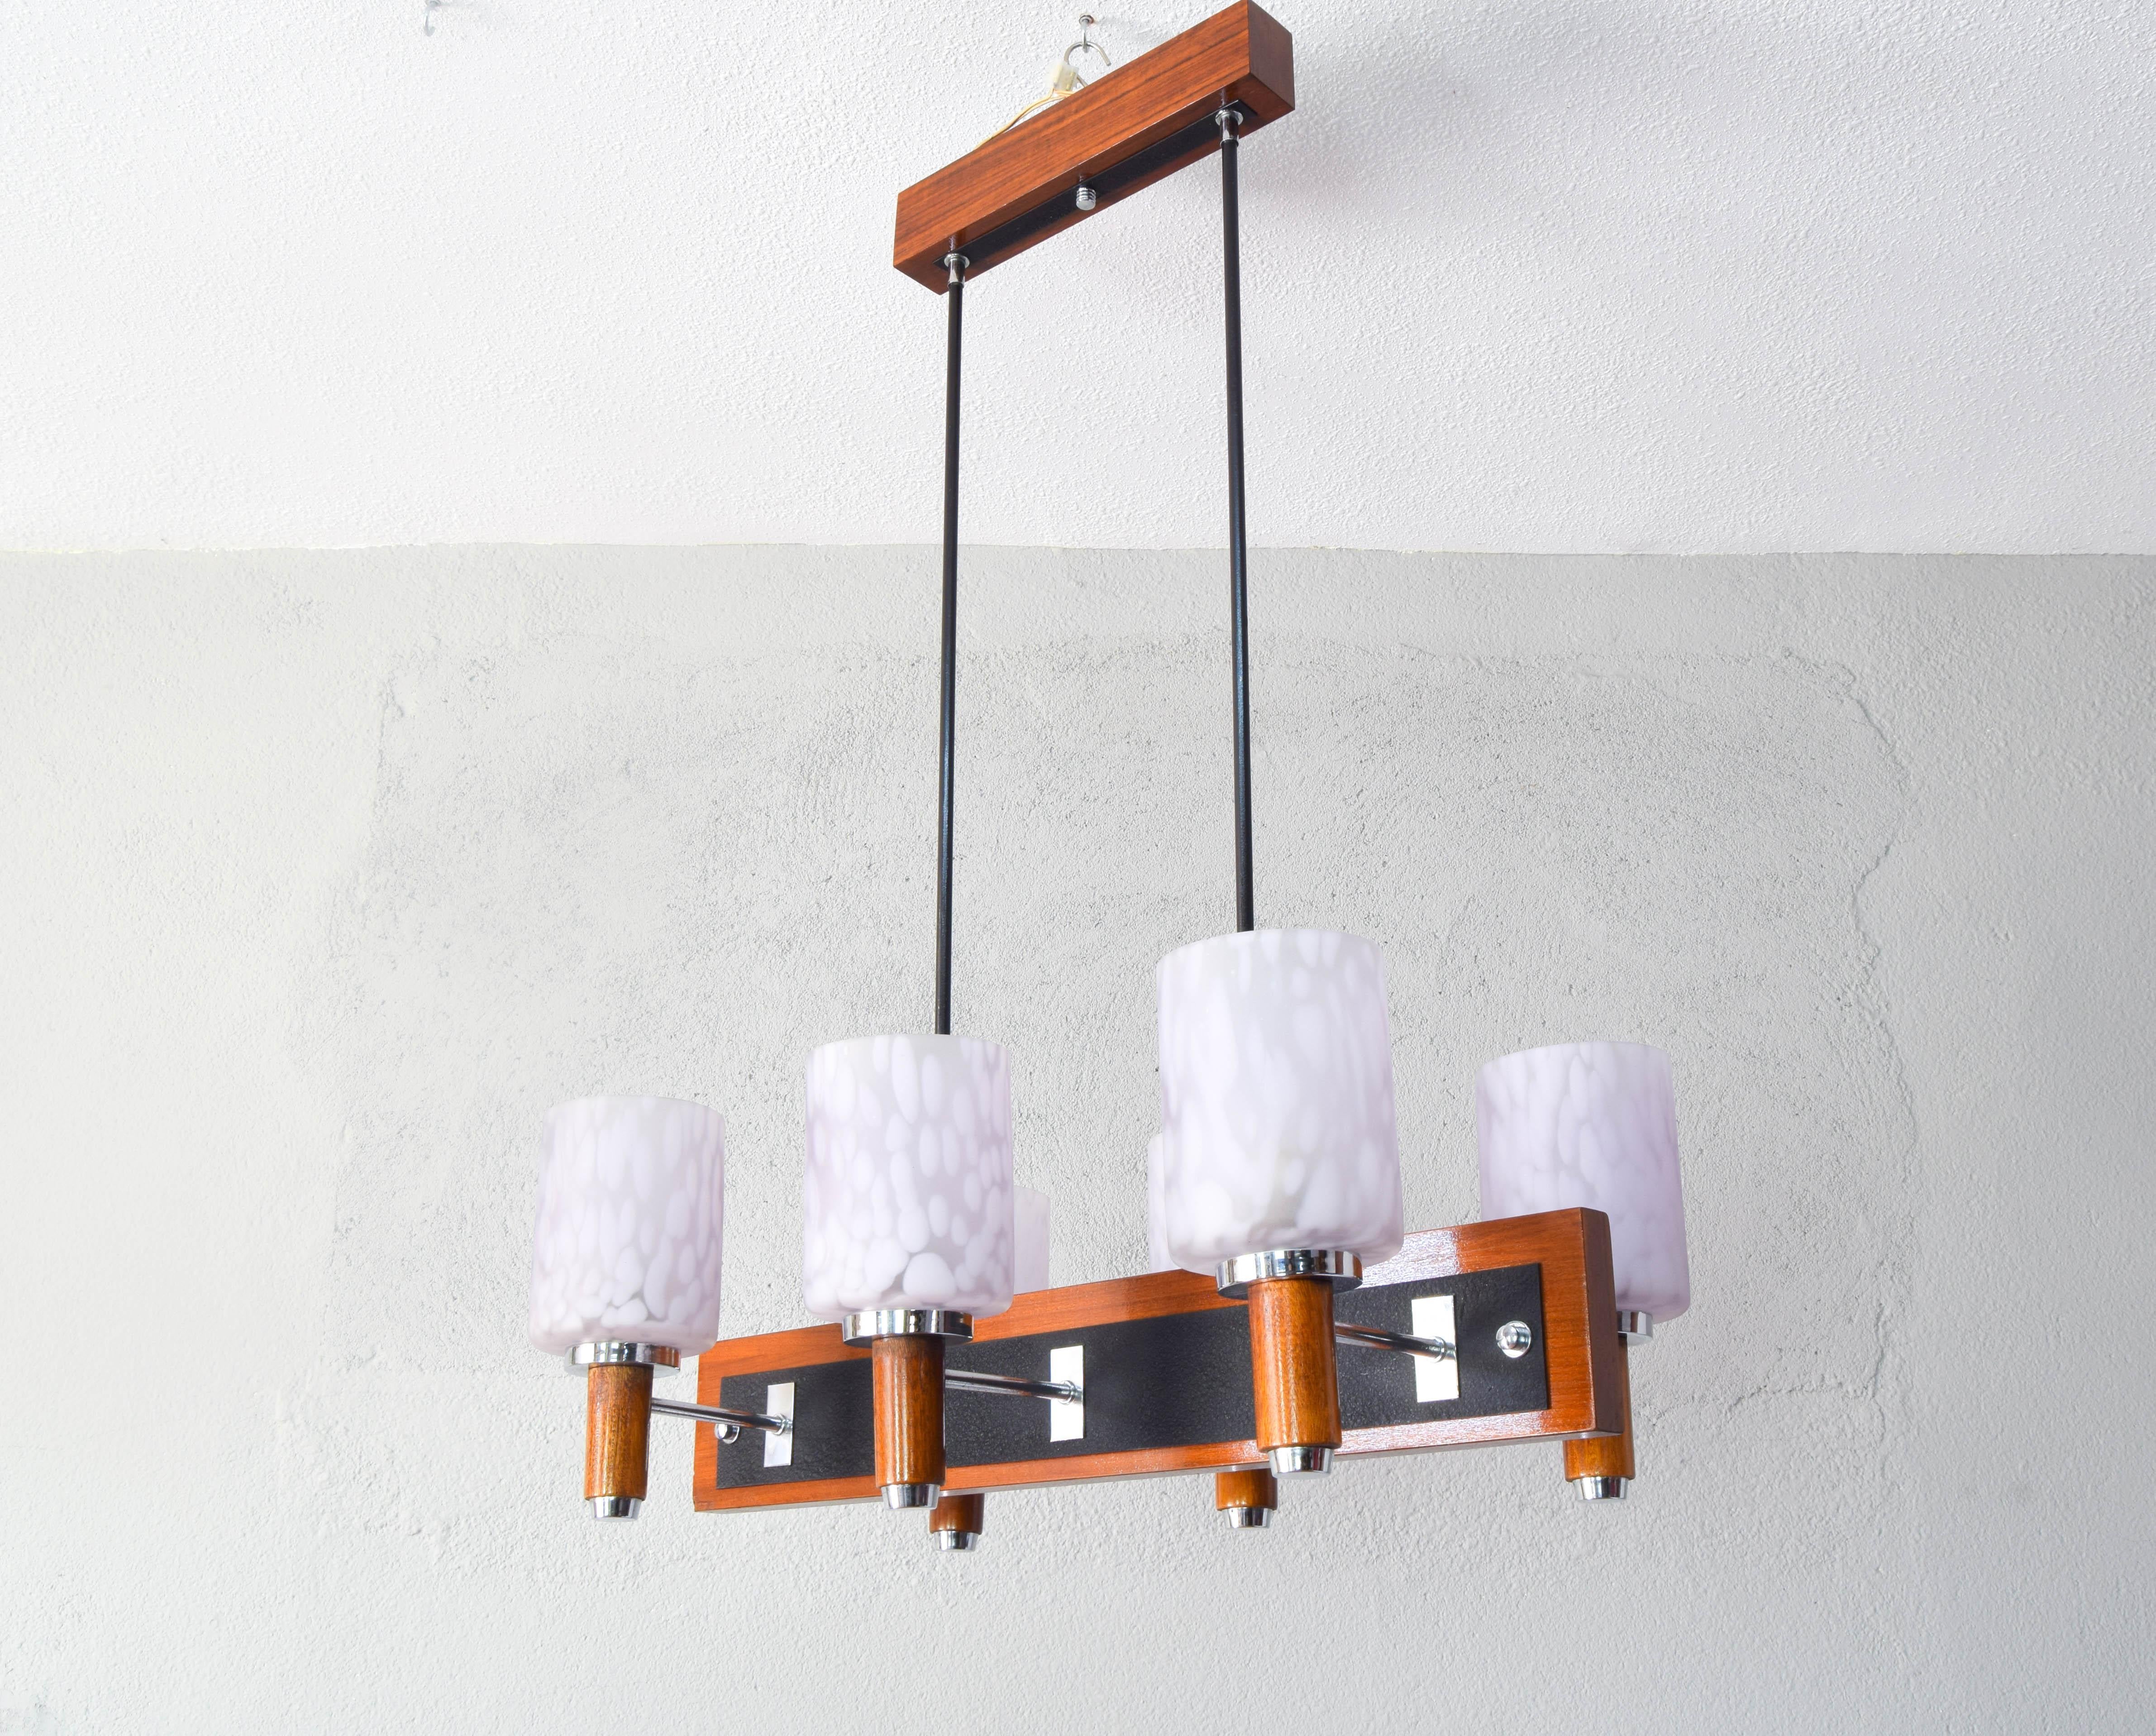 Scandinavian six-light chandelier in the style of Jo Hammerborg. Teak wood body with steel and iron appliqués and Murano glass lampshades.
Ceiling lamp with a warm and elegant design that achieves the combination of the materials